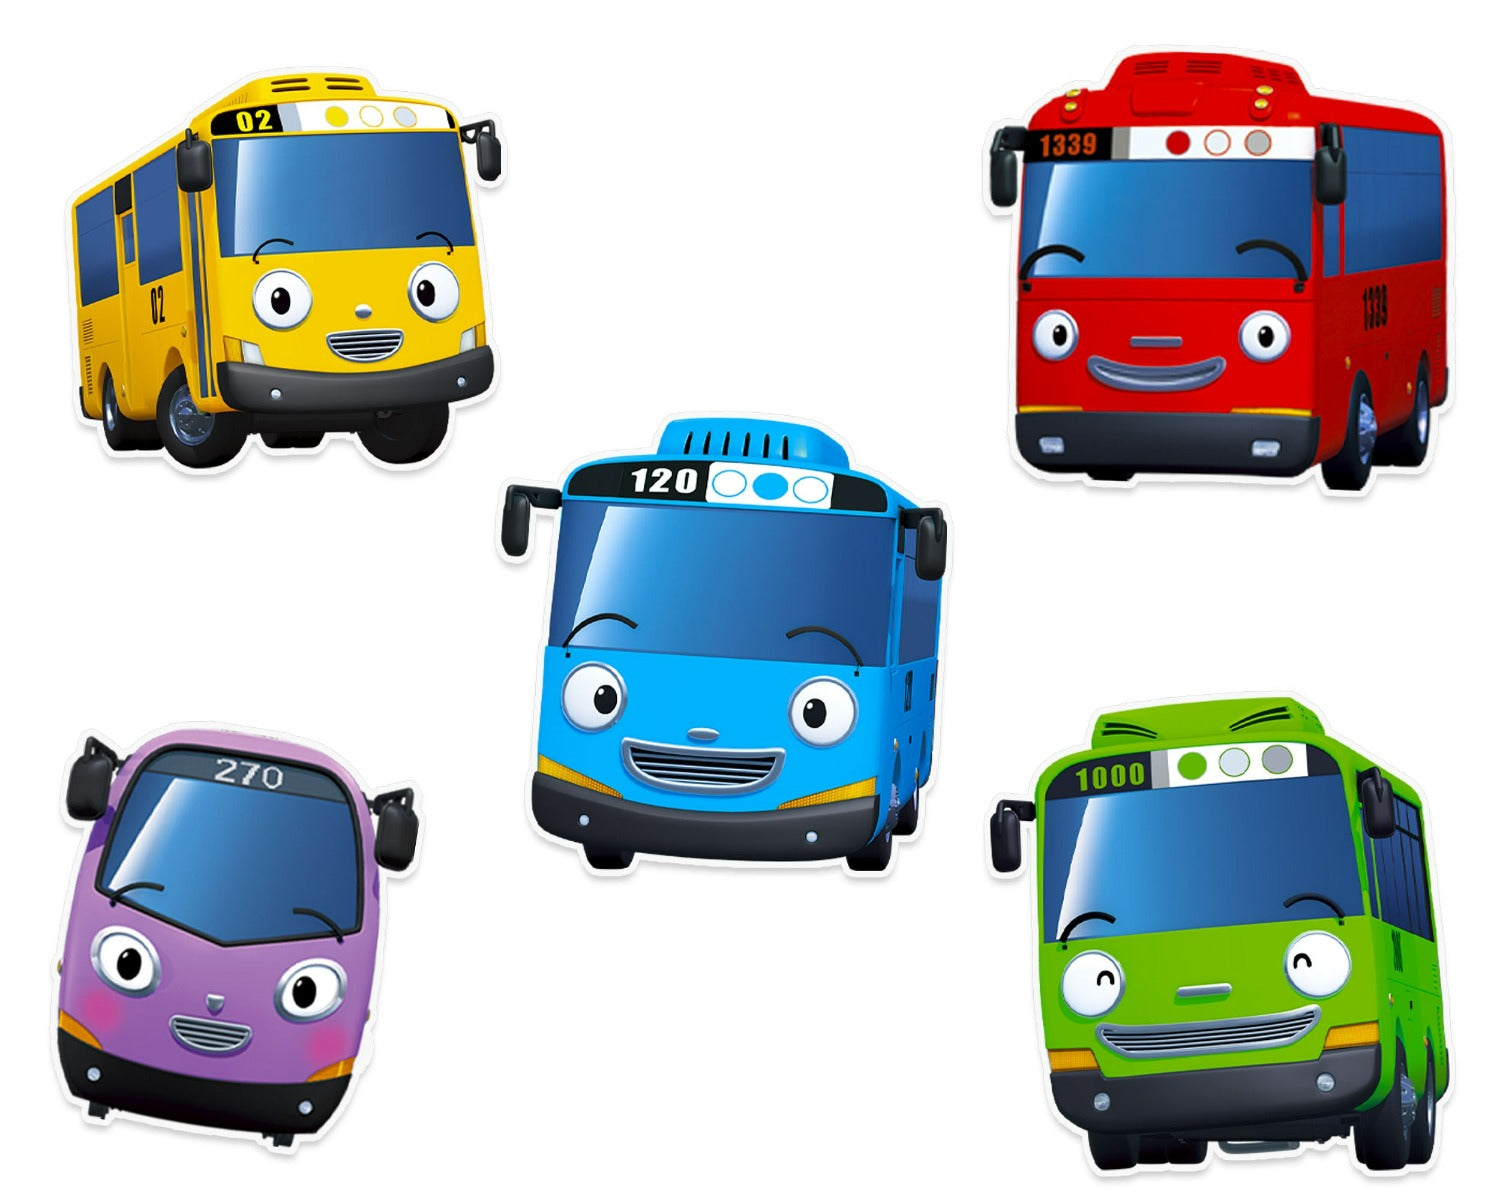 "Zoom into Fun with Little Bus Tayo" - Adhesive Wall Stickers Set of 5